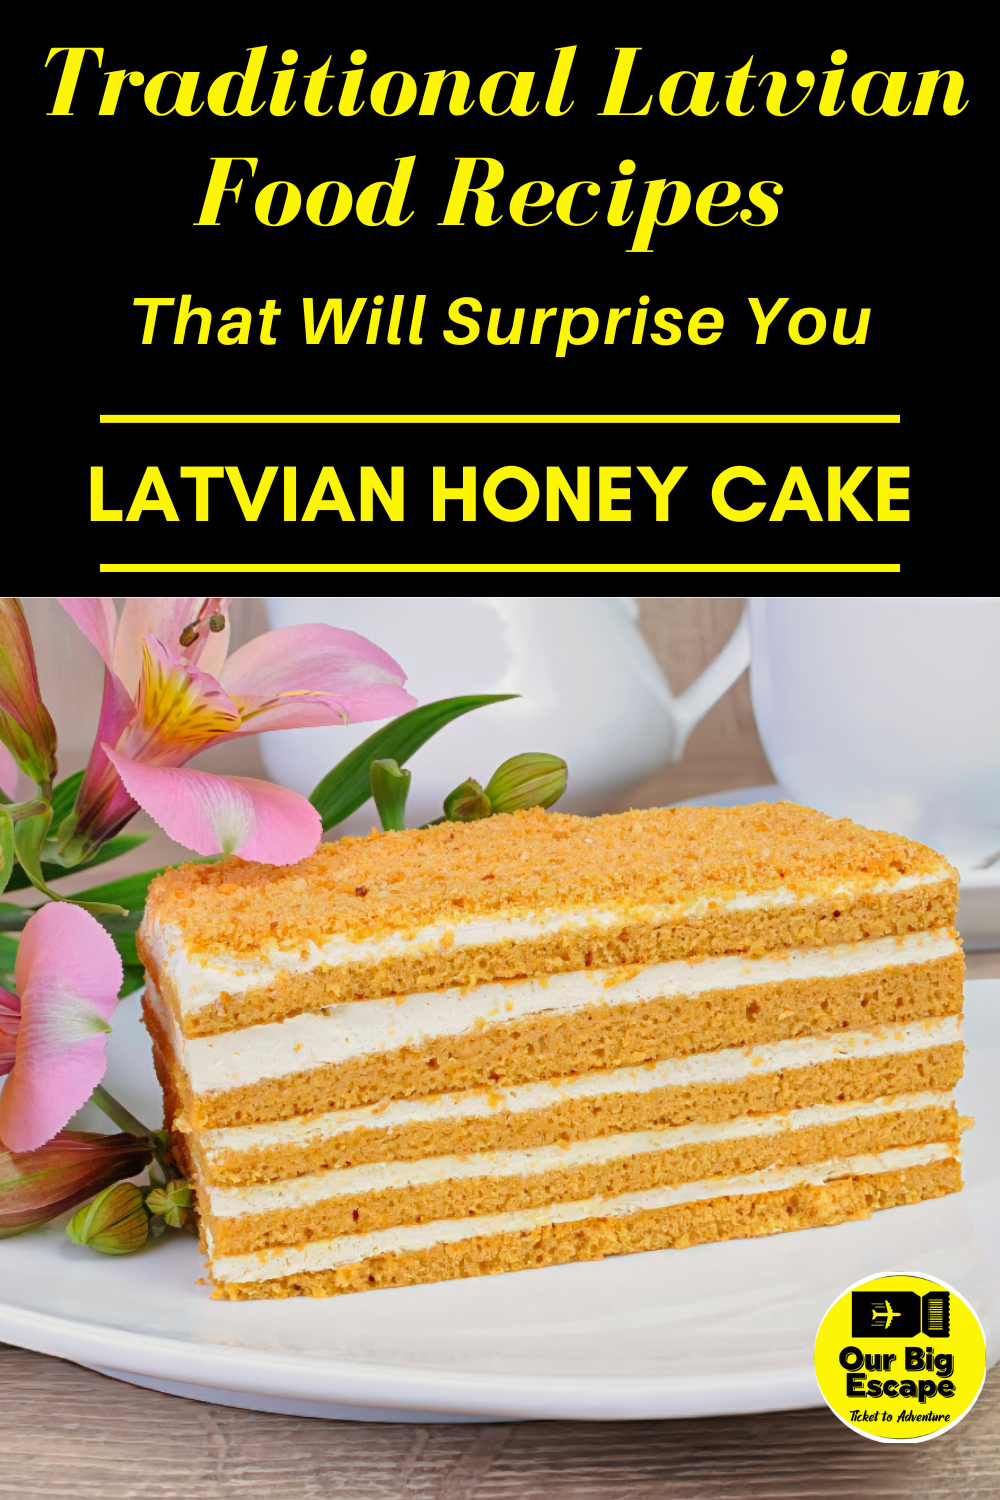 Latvian Honey Cake - 19 Traditional Latvian Food Recipes That Will Surprise You